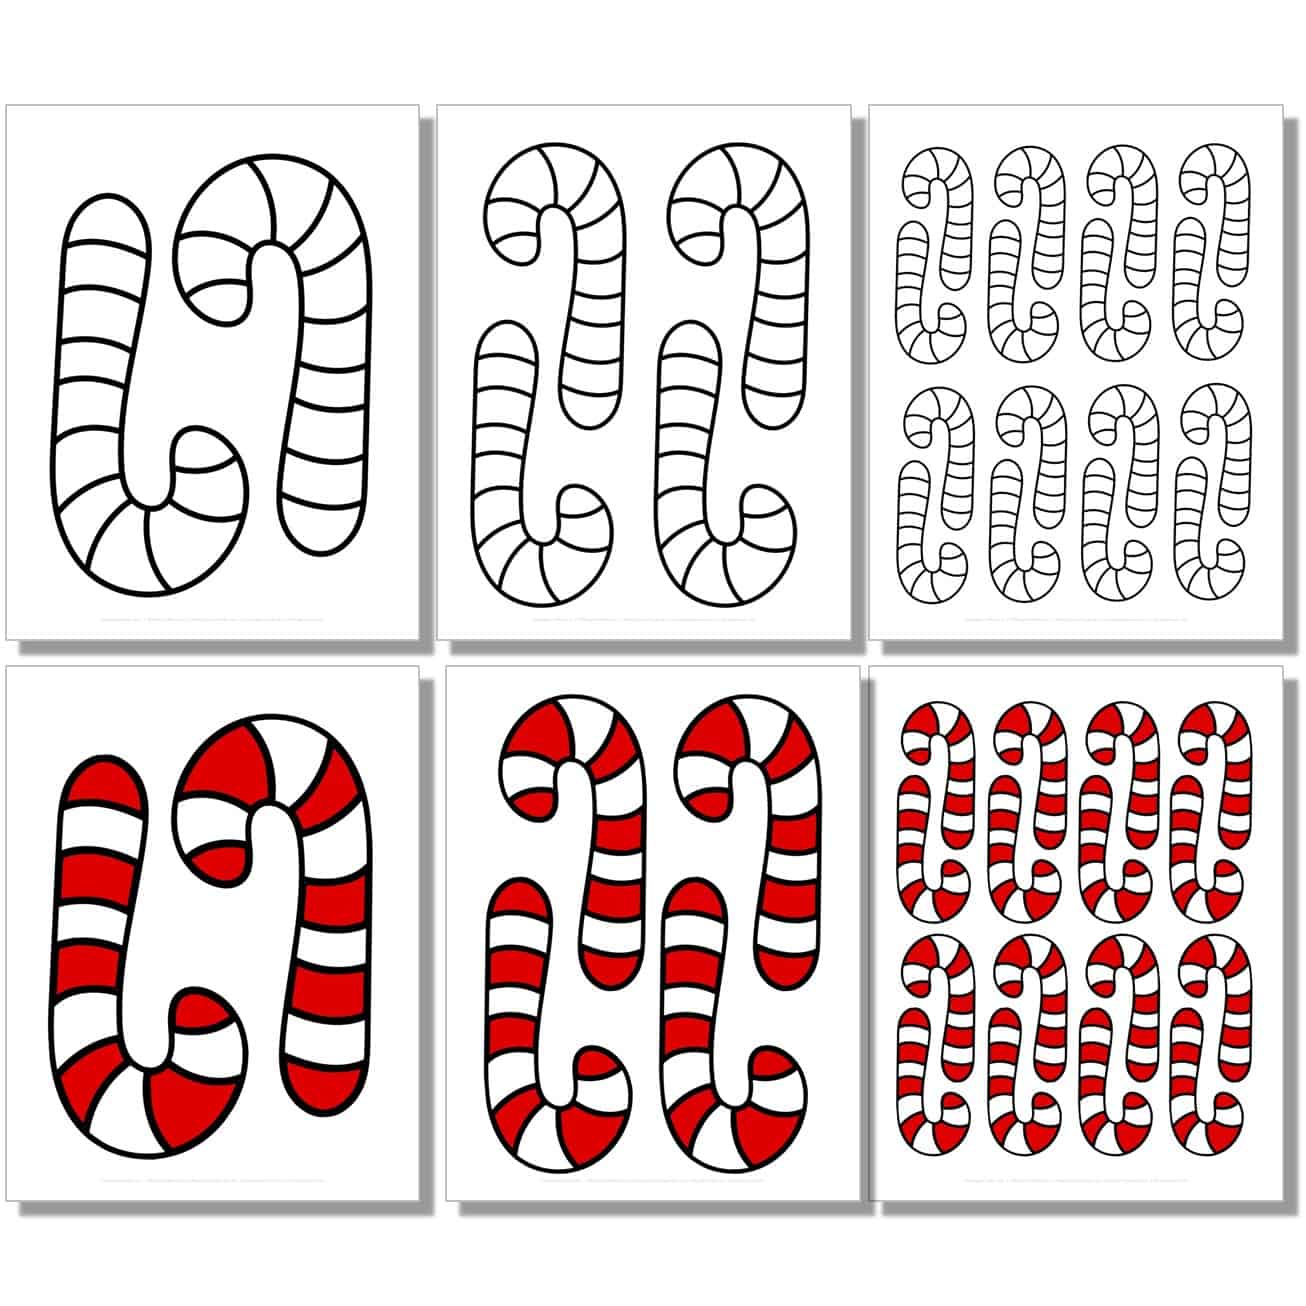 free small, medium, large fat cartoon candy cane template in black, white, color